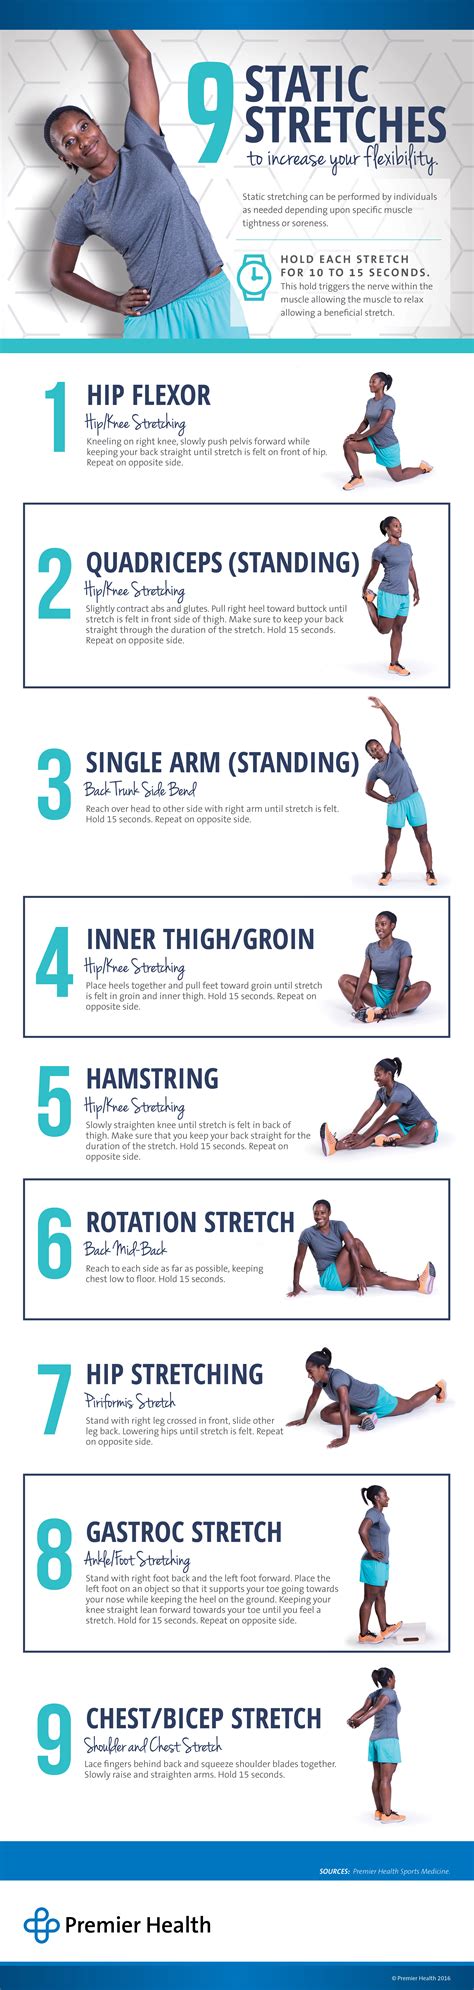 9 Static Stretches To Increase Your Flexibility Premier Health